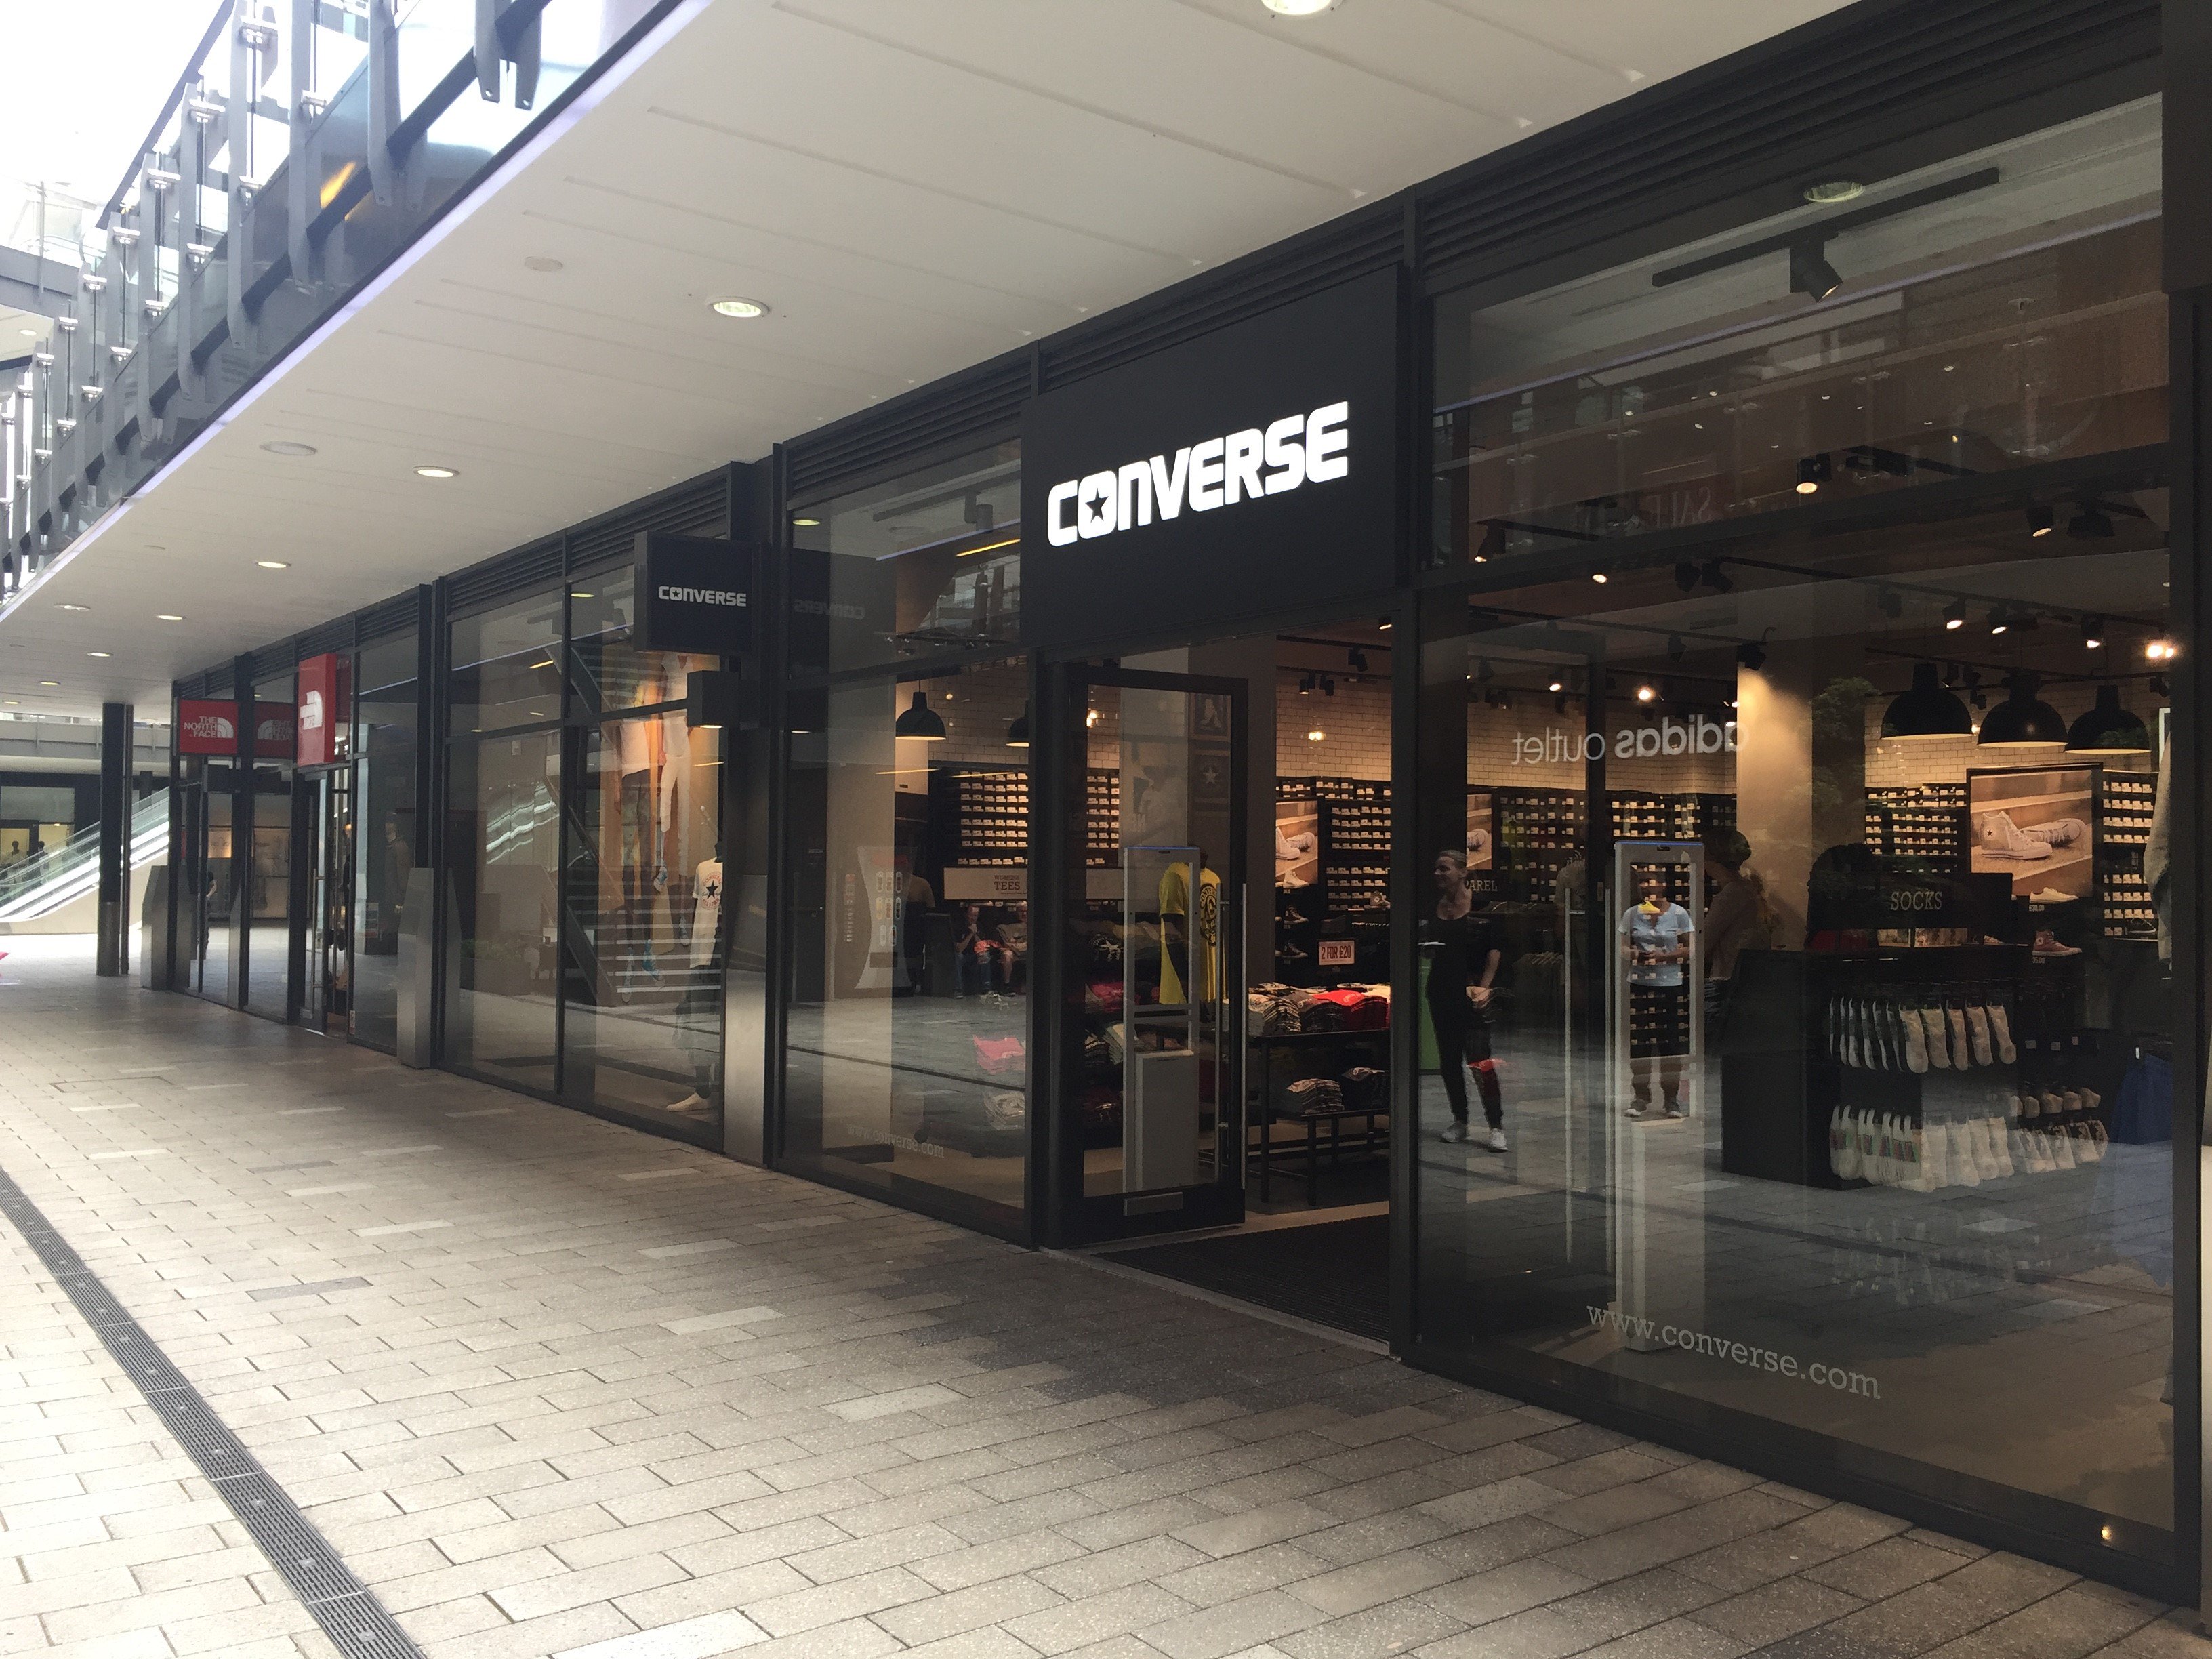 estoy de acuerdo Nevada granizo تويتر \ London Designer Outlet على تويتر: "Our @Converse store is now open!  Hurry on down - your future pair of Converse is eagerly awaiting you to buy  them! https://t.co/IEsKqlTllv"